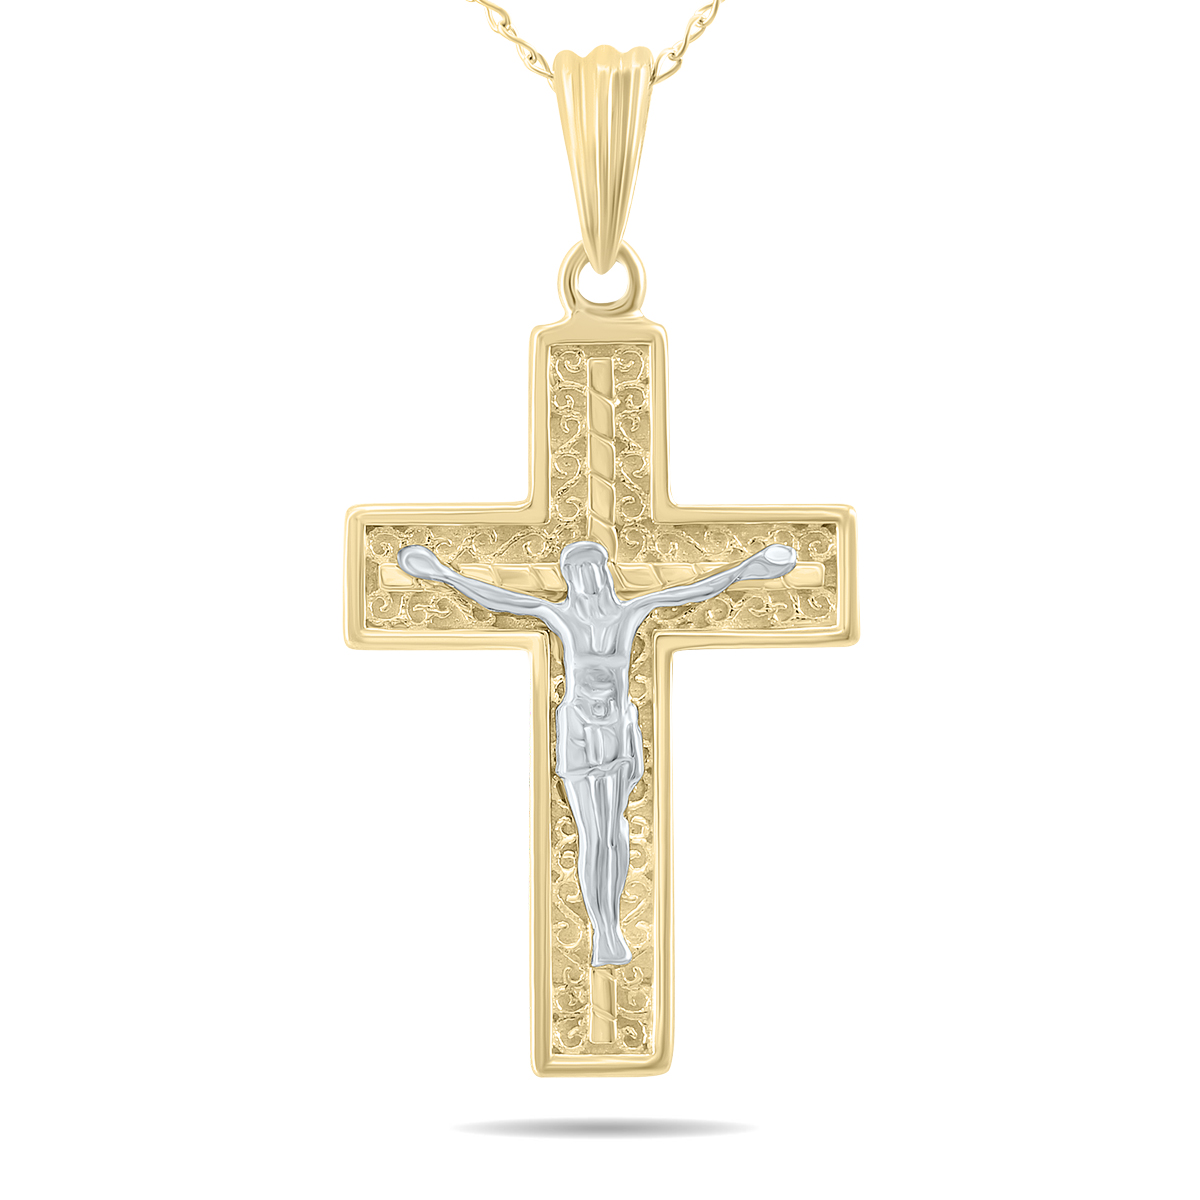 Crucifixion Cross Pendant Necklace with 18 Inch Chain in 10K Yellow Gold and White Rhodium Polish